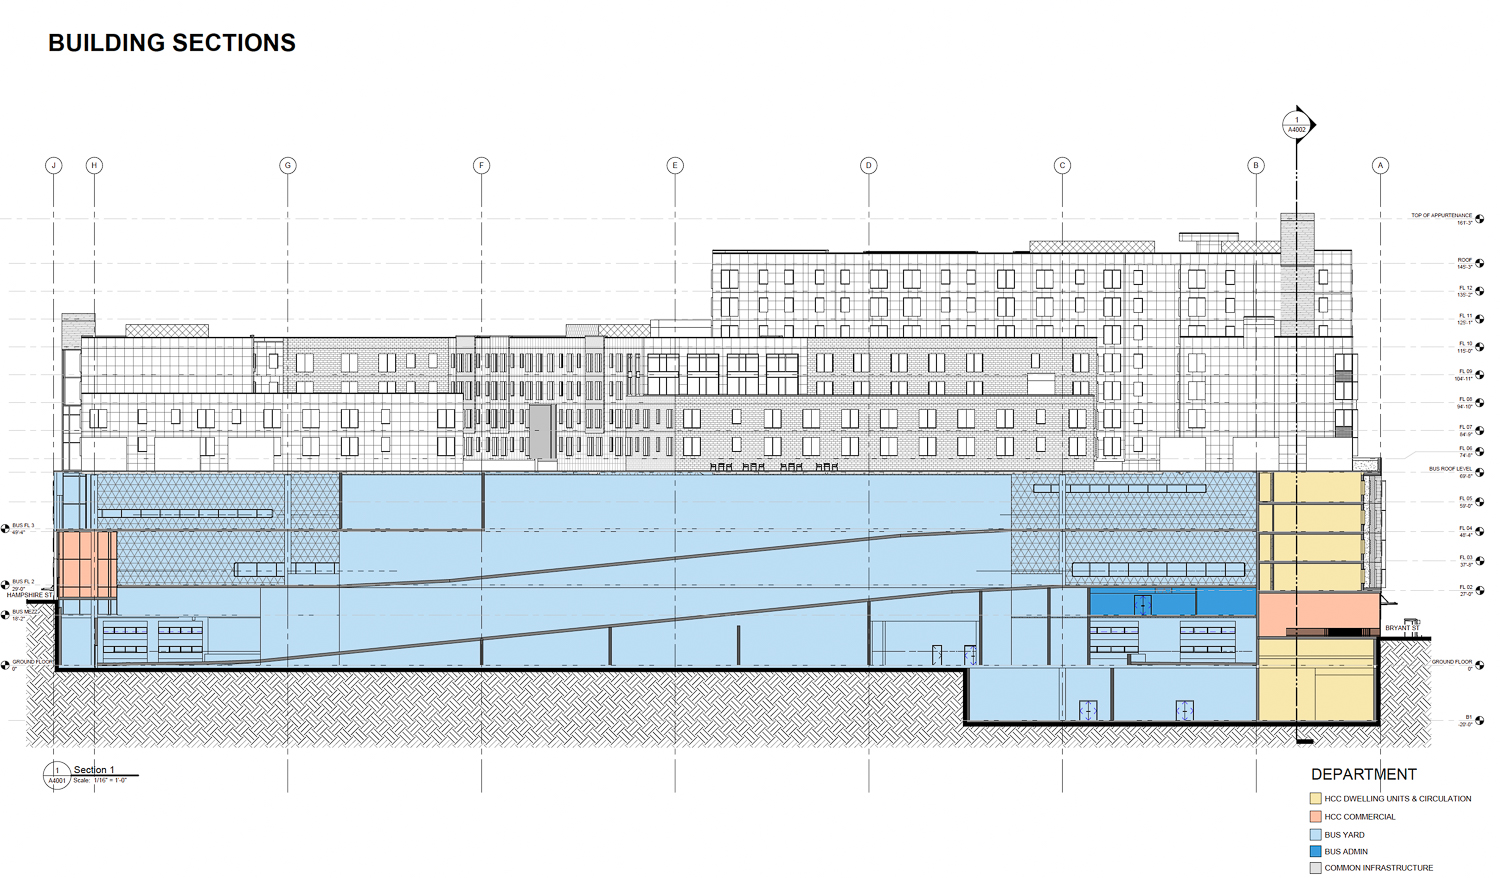 Potrero Yard vertical cross-section, illustration by IBI Group